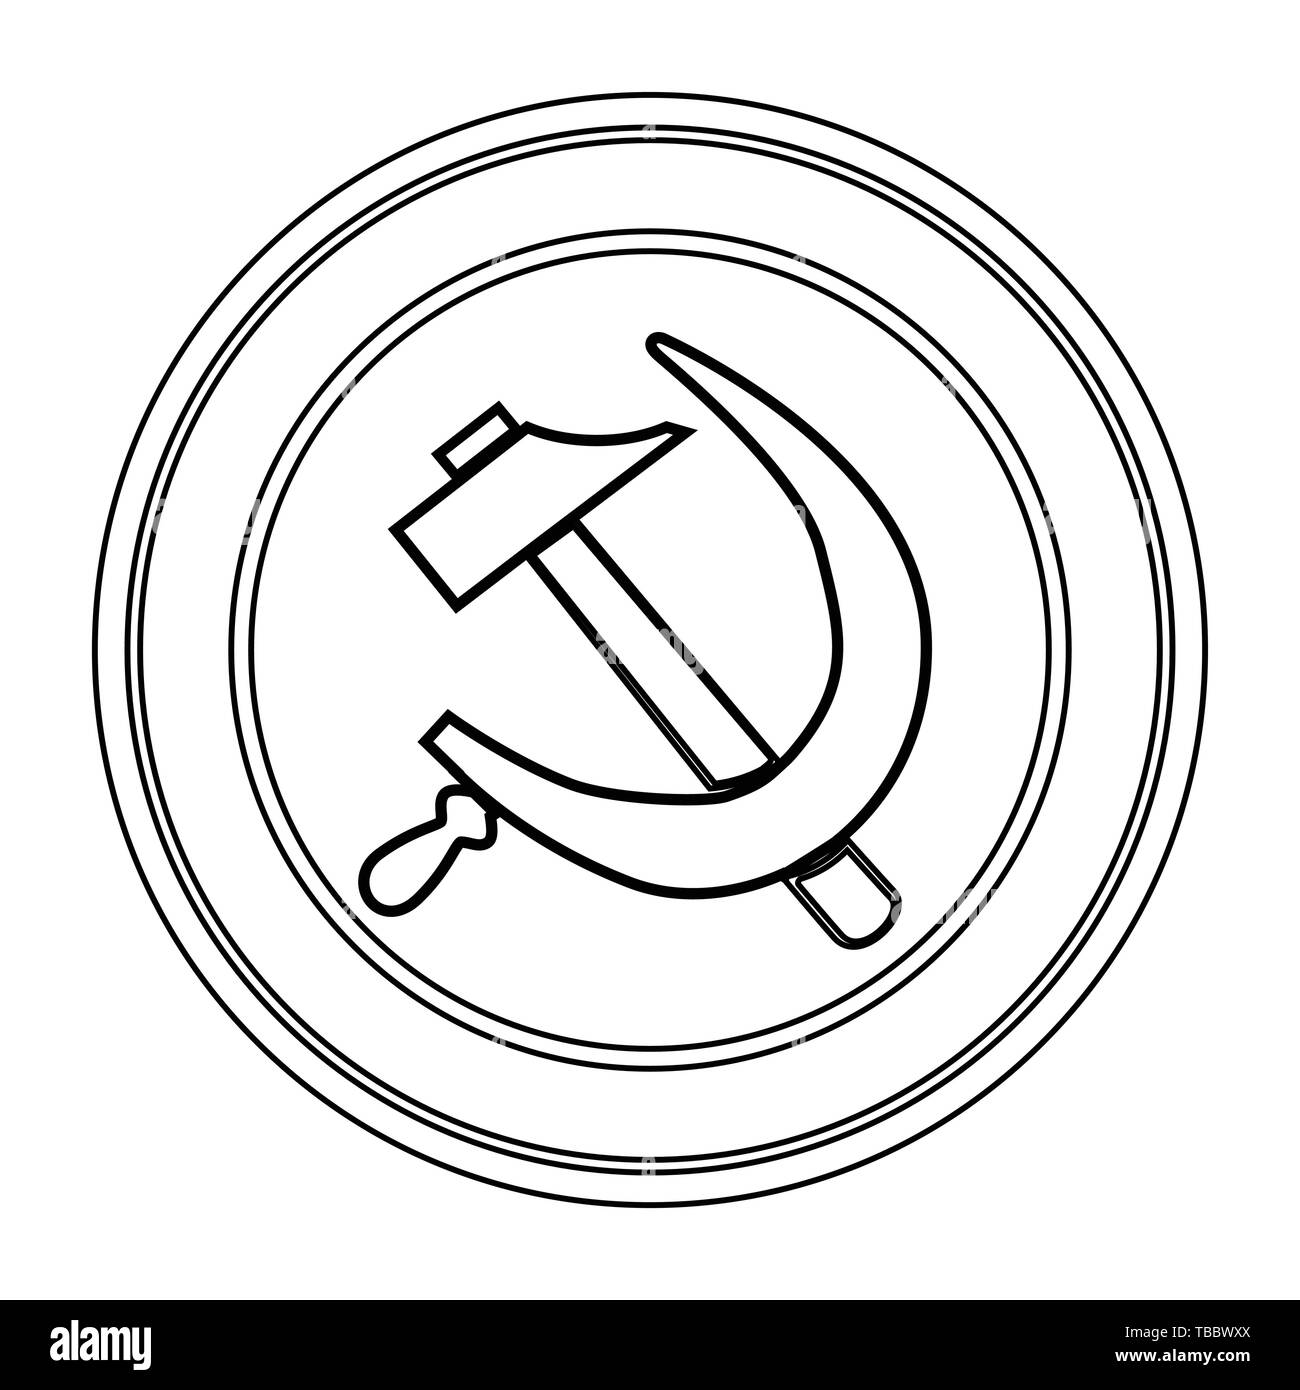 A Russian army round enamel pin badge Stock Vector